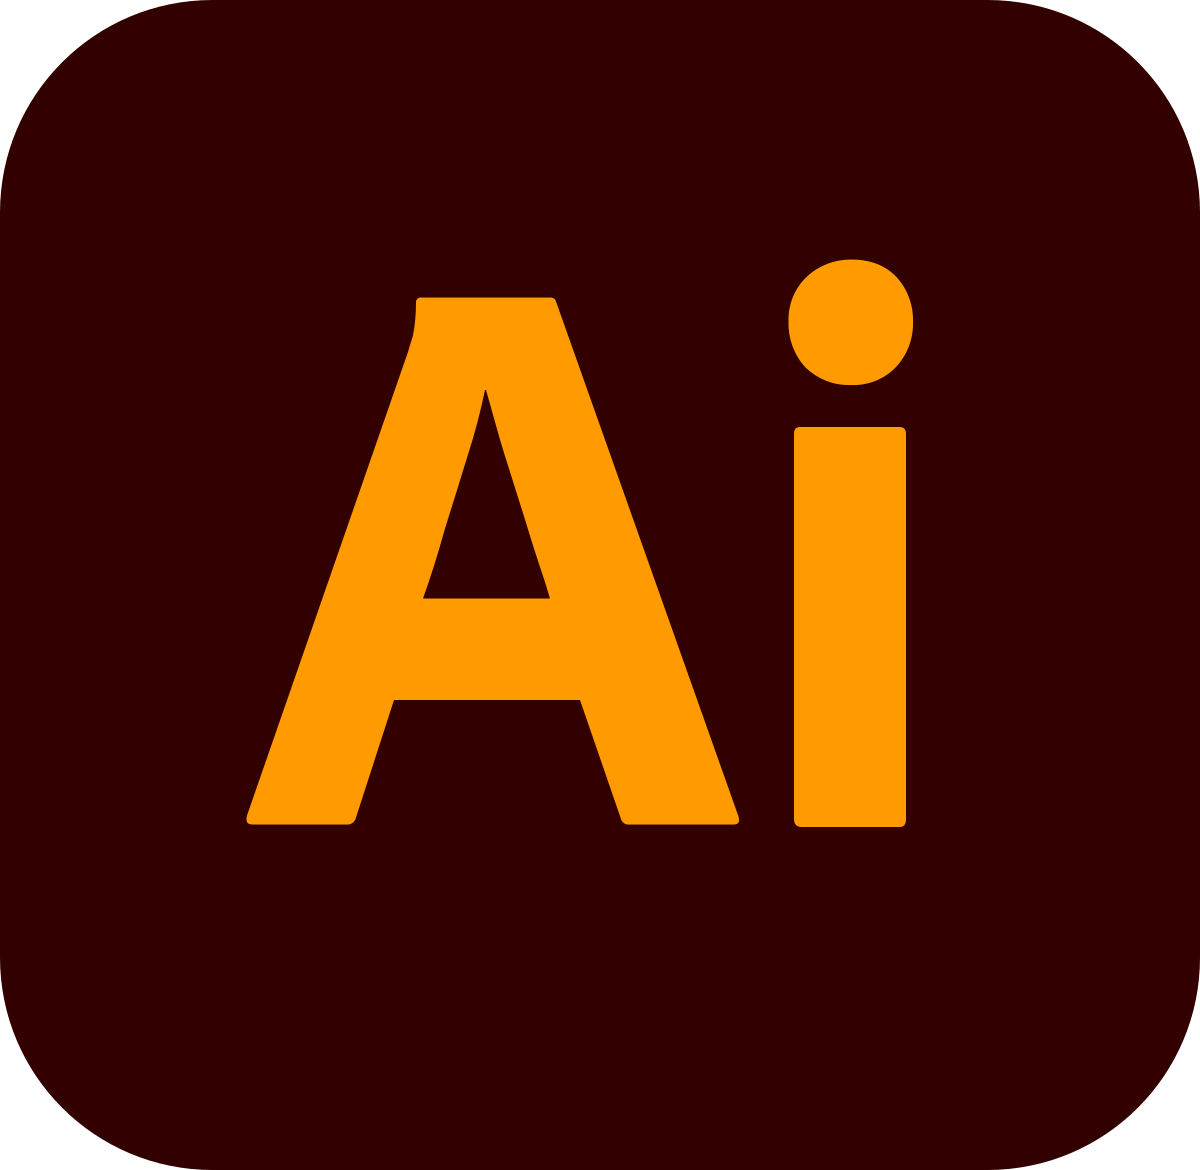 what is the best mac configuration for running adobe products